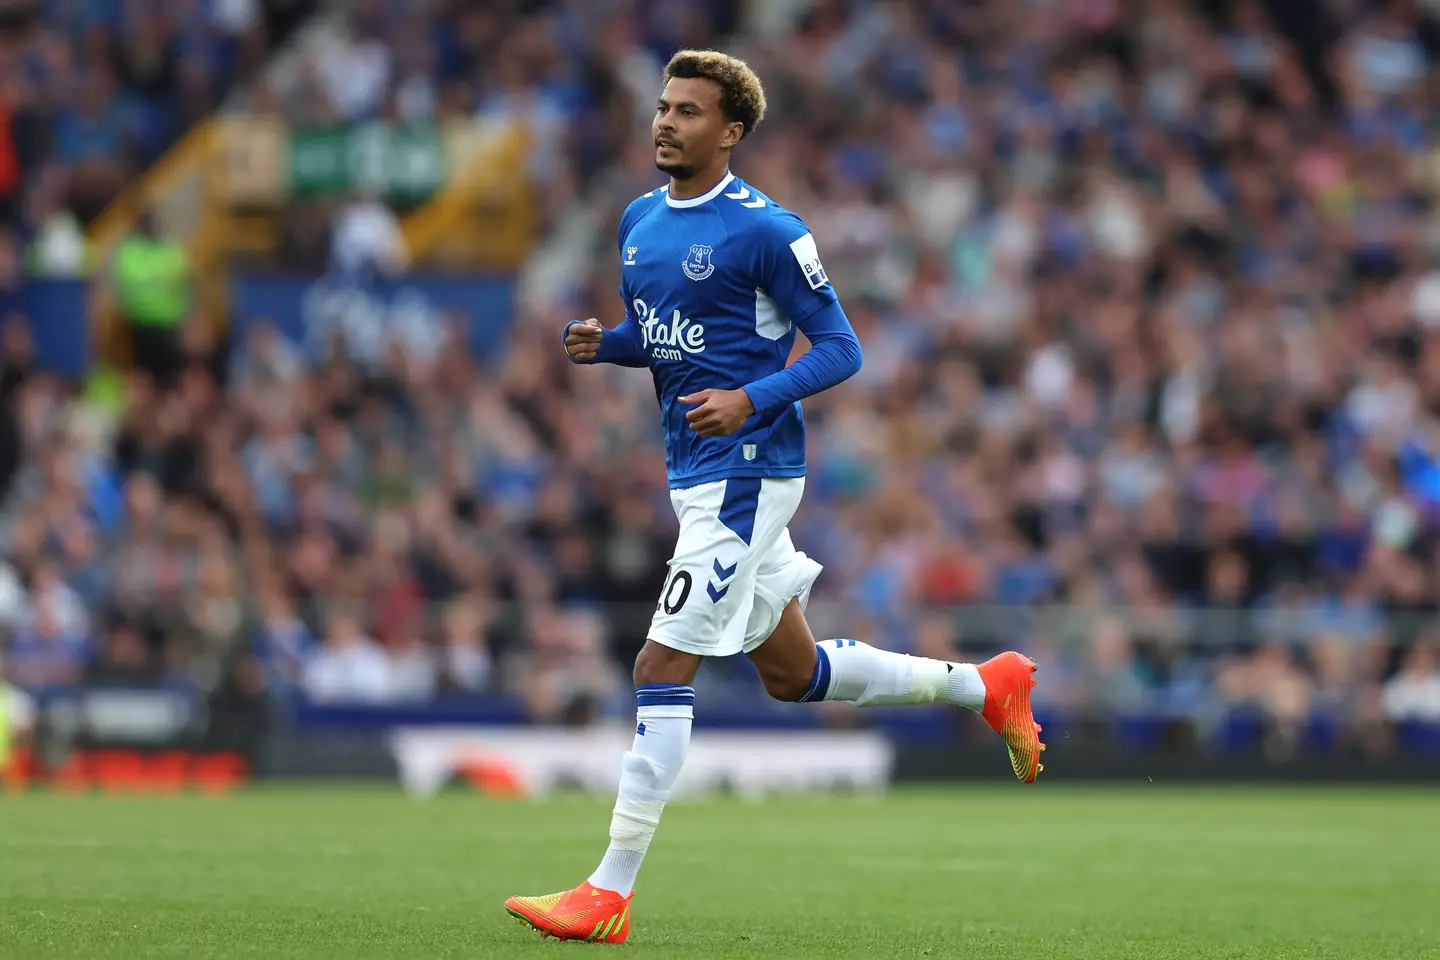 Dele Alli in action for Everton. Image: Getty